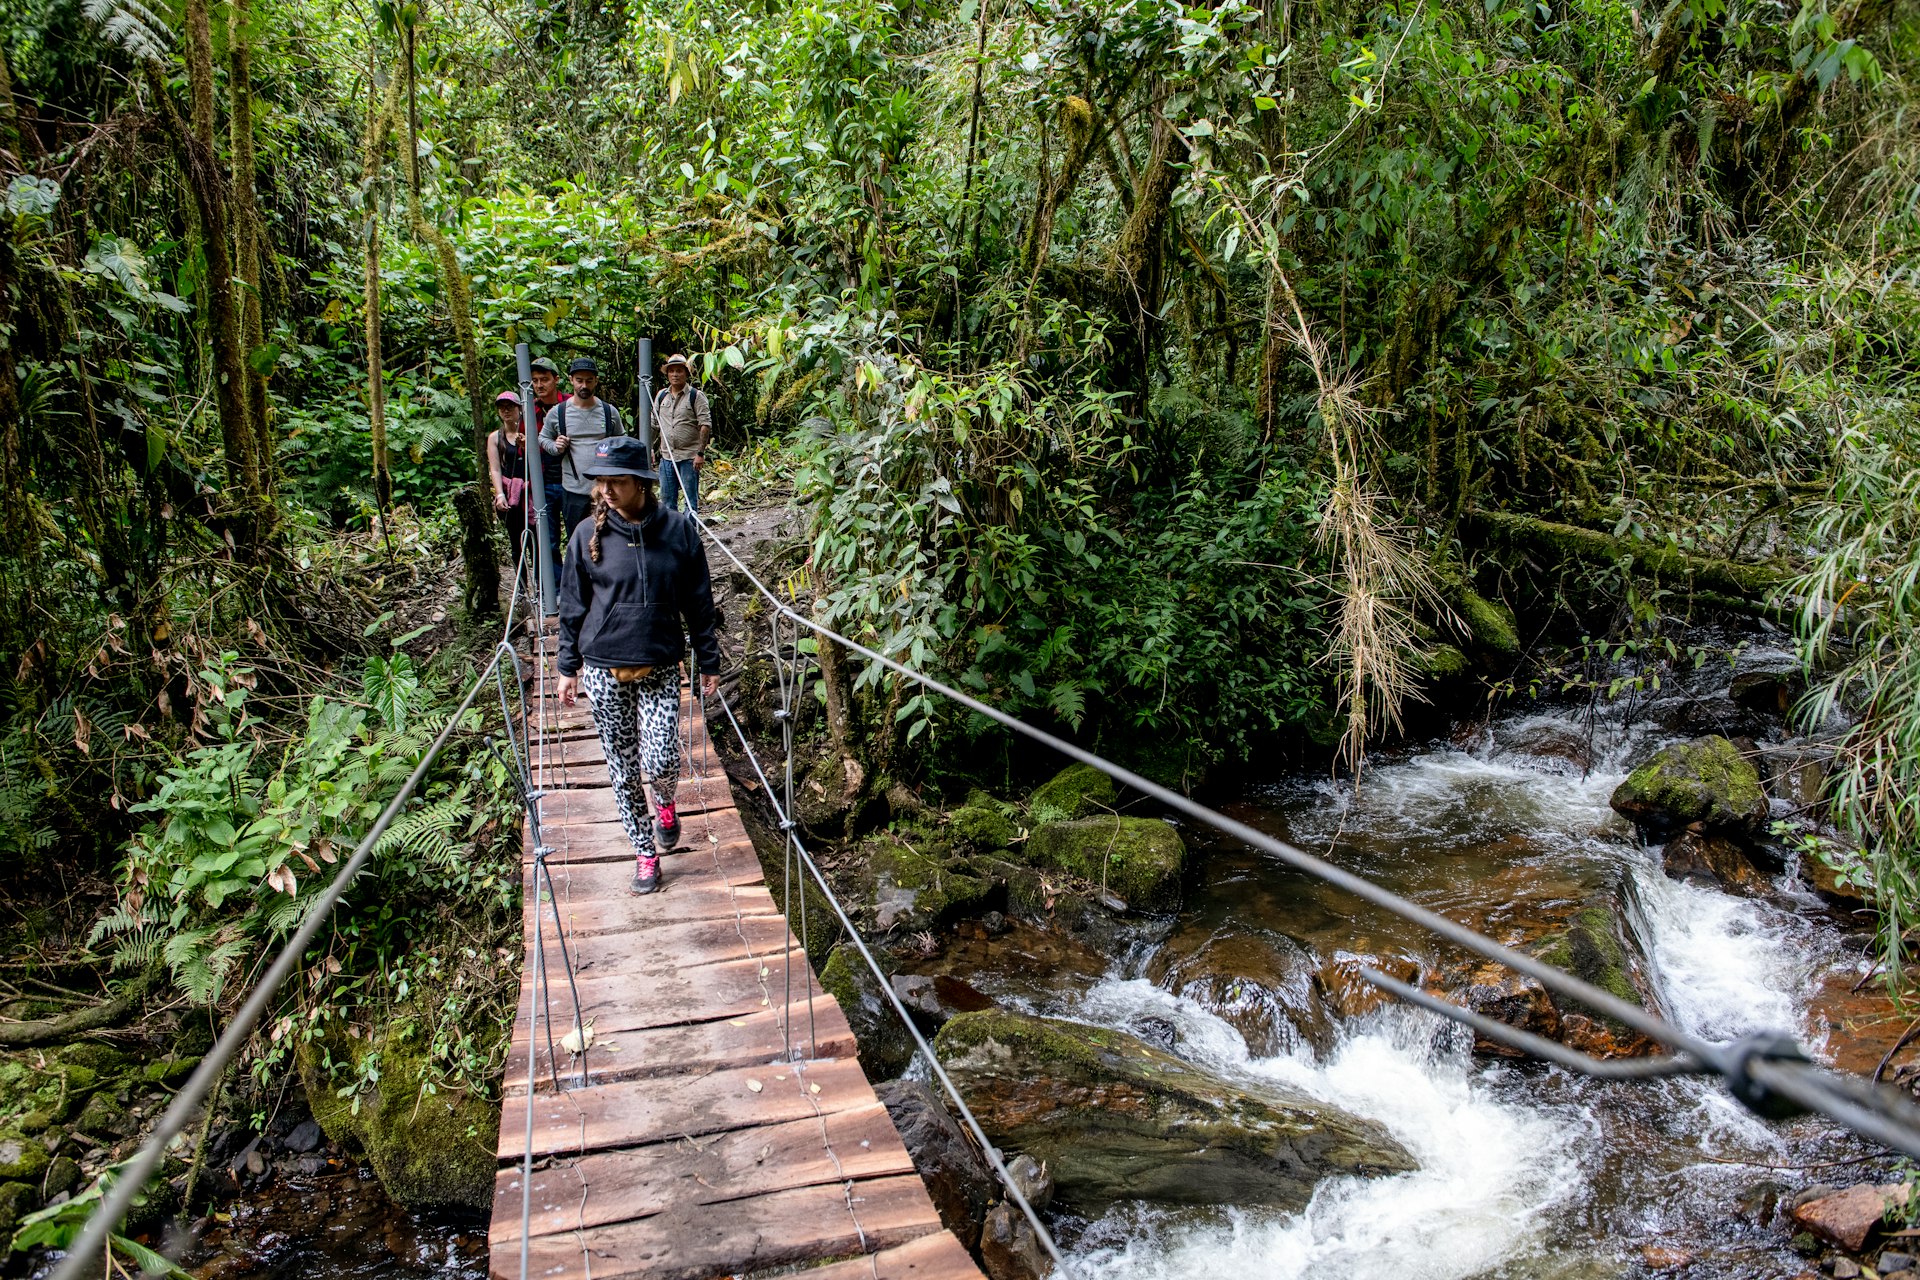 Hikers cross a wooden suspension bridge in a jungle environment